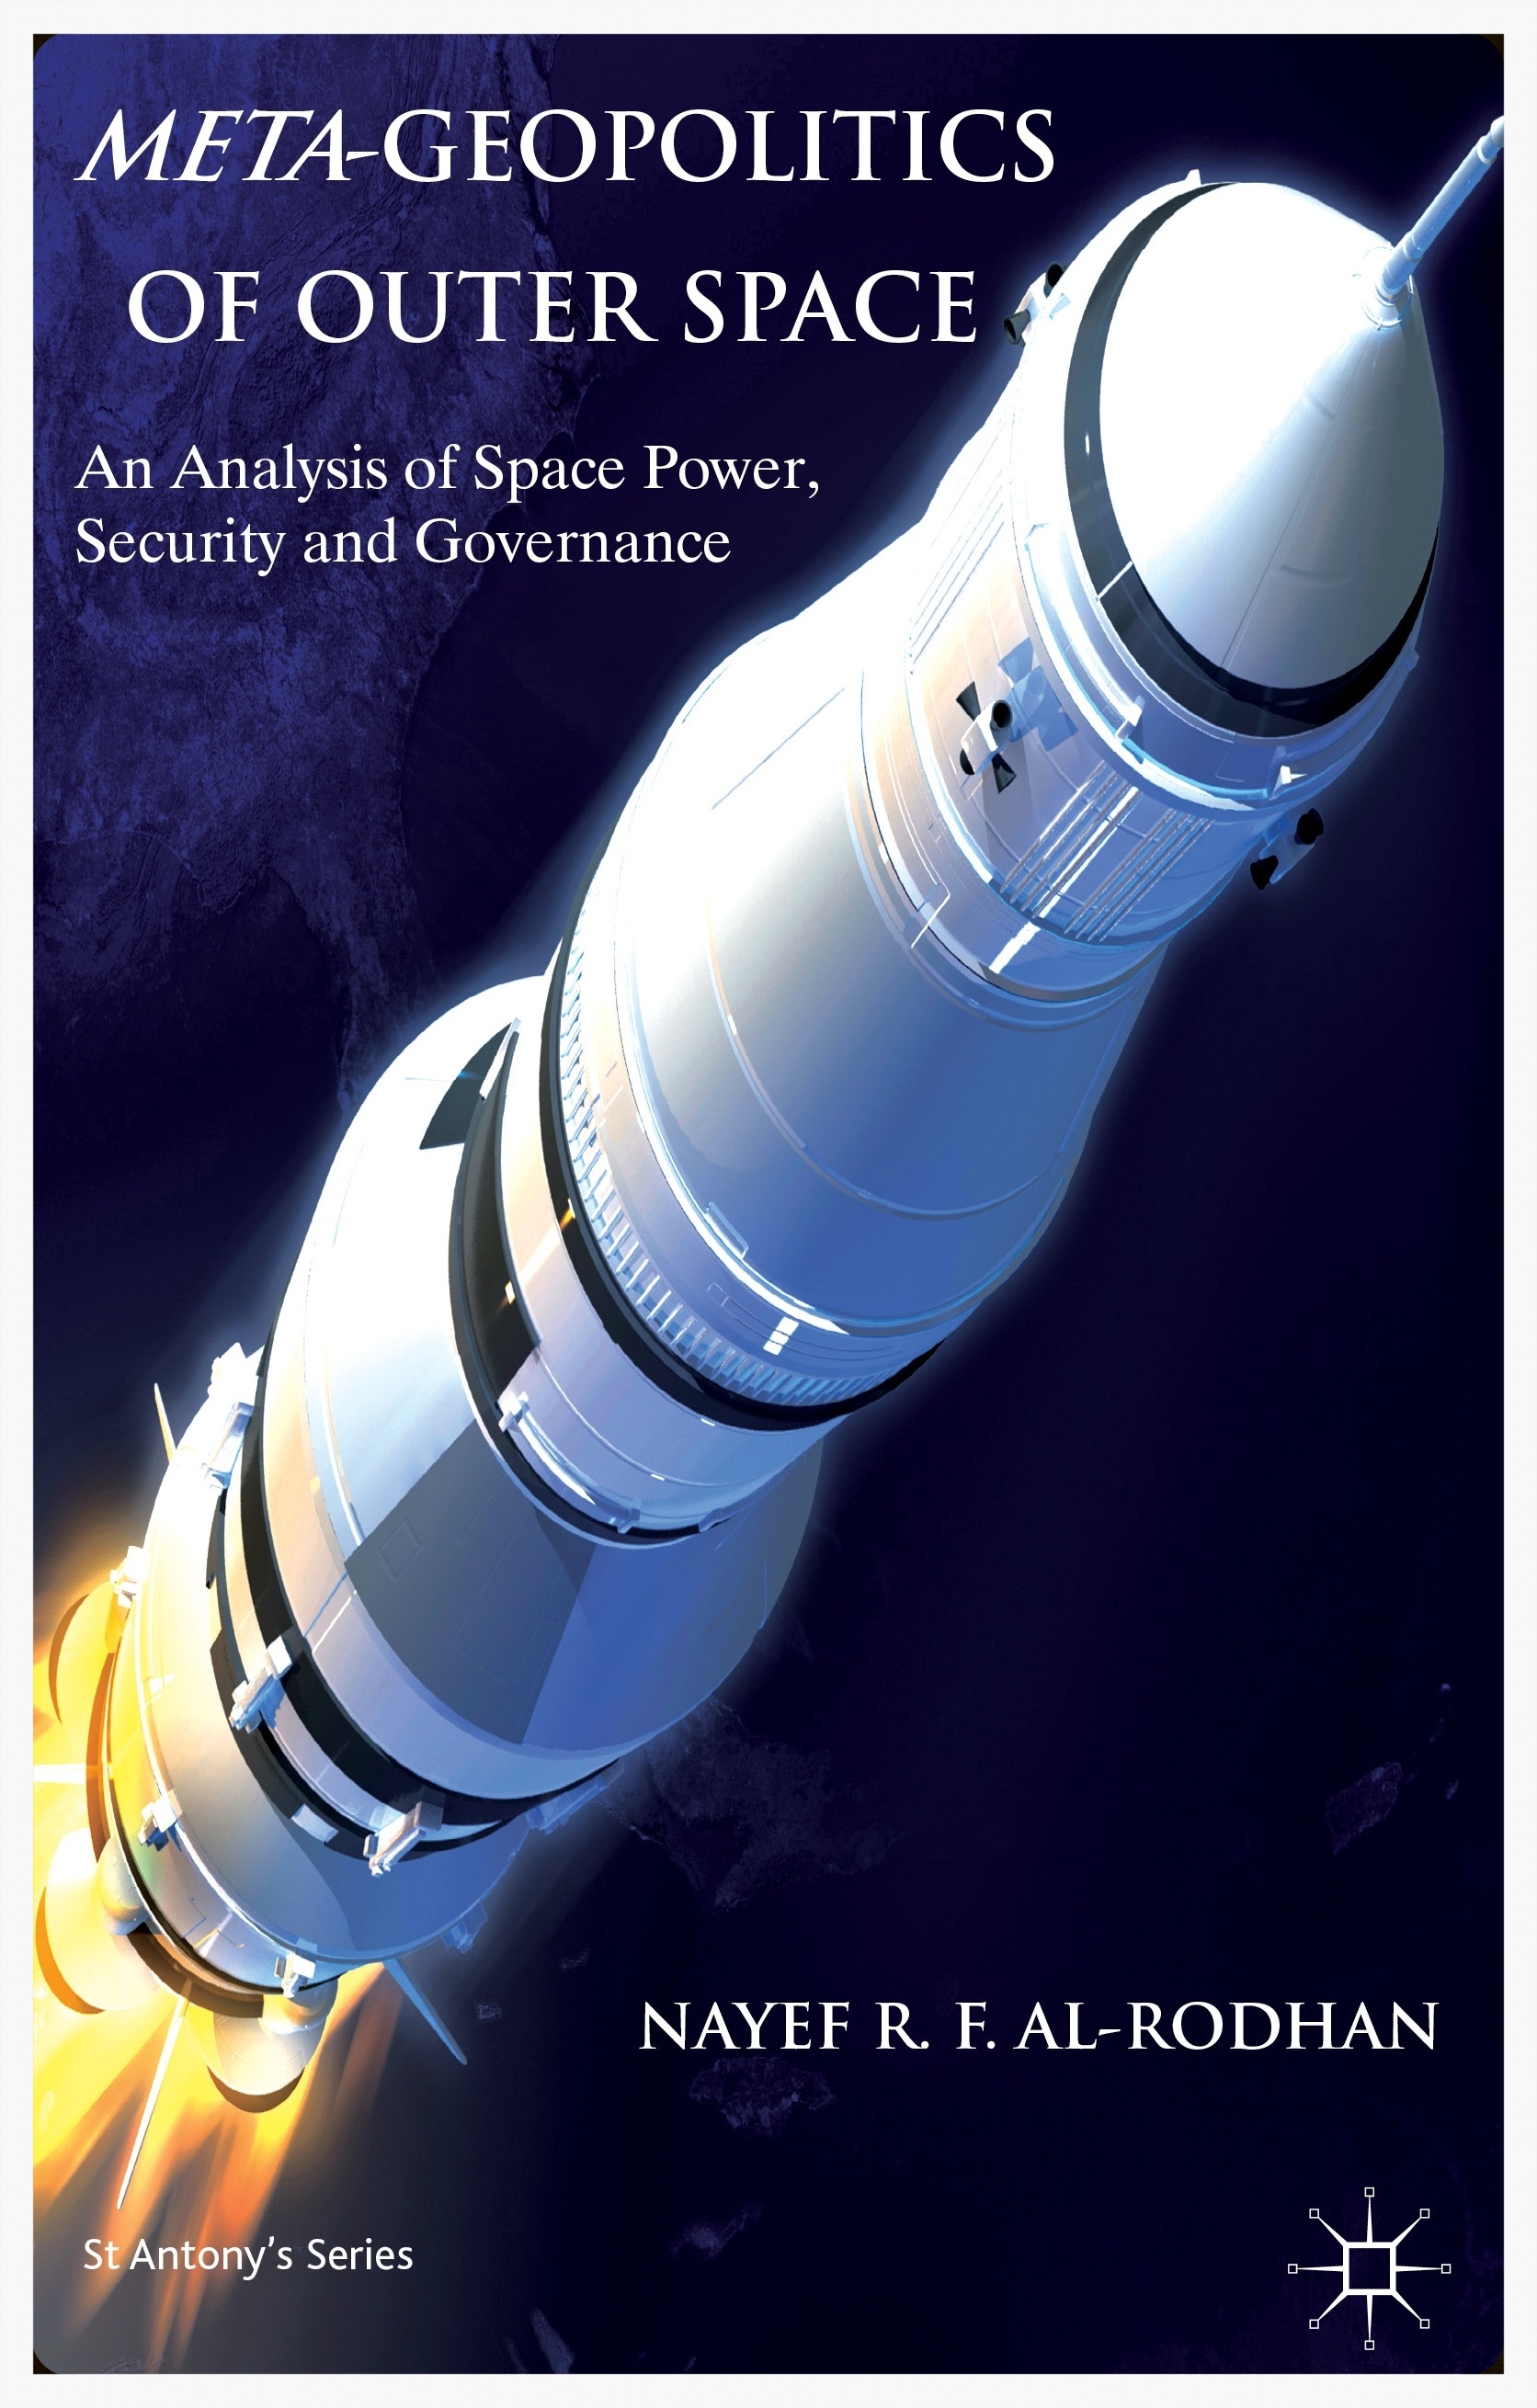 META-GEOPOLITICS OF OUTER SPACE: An Analysis of Space Power, Security and Governance (St Antony's Series)